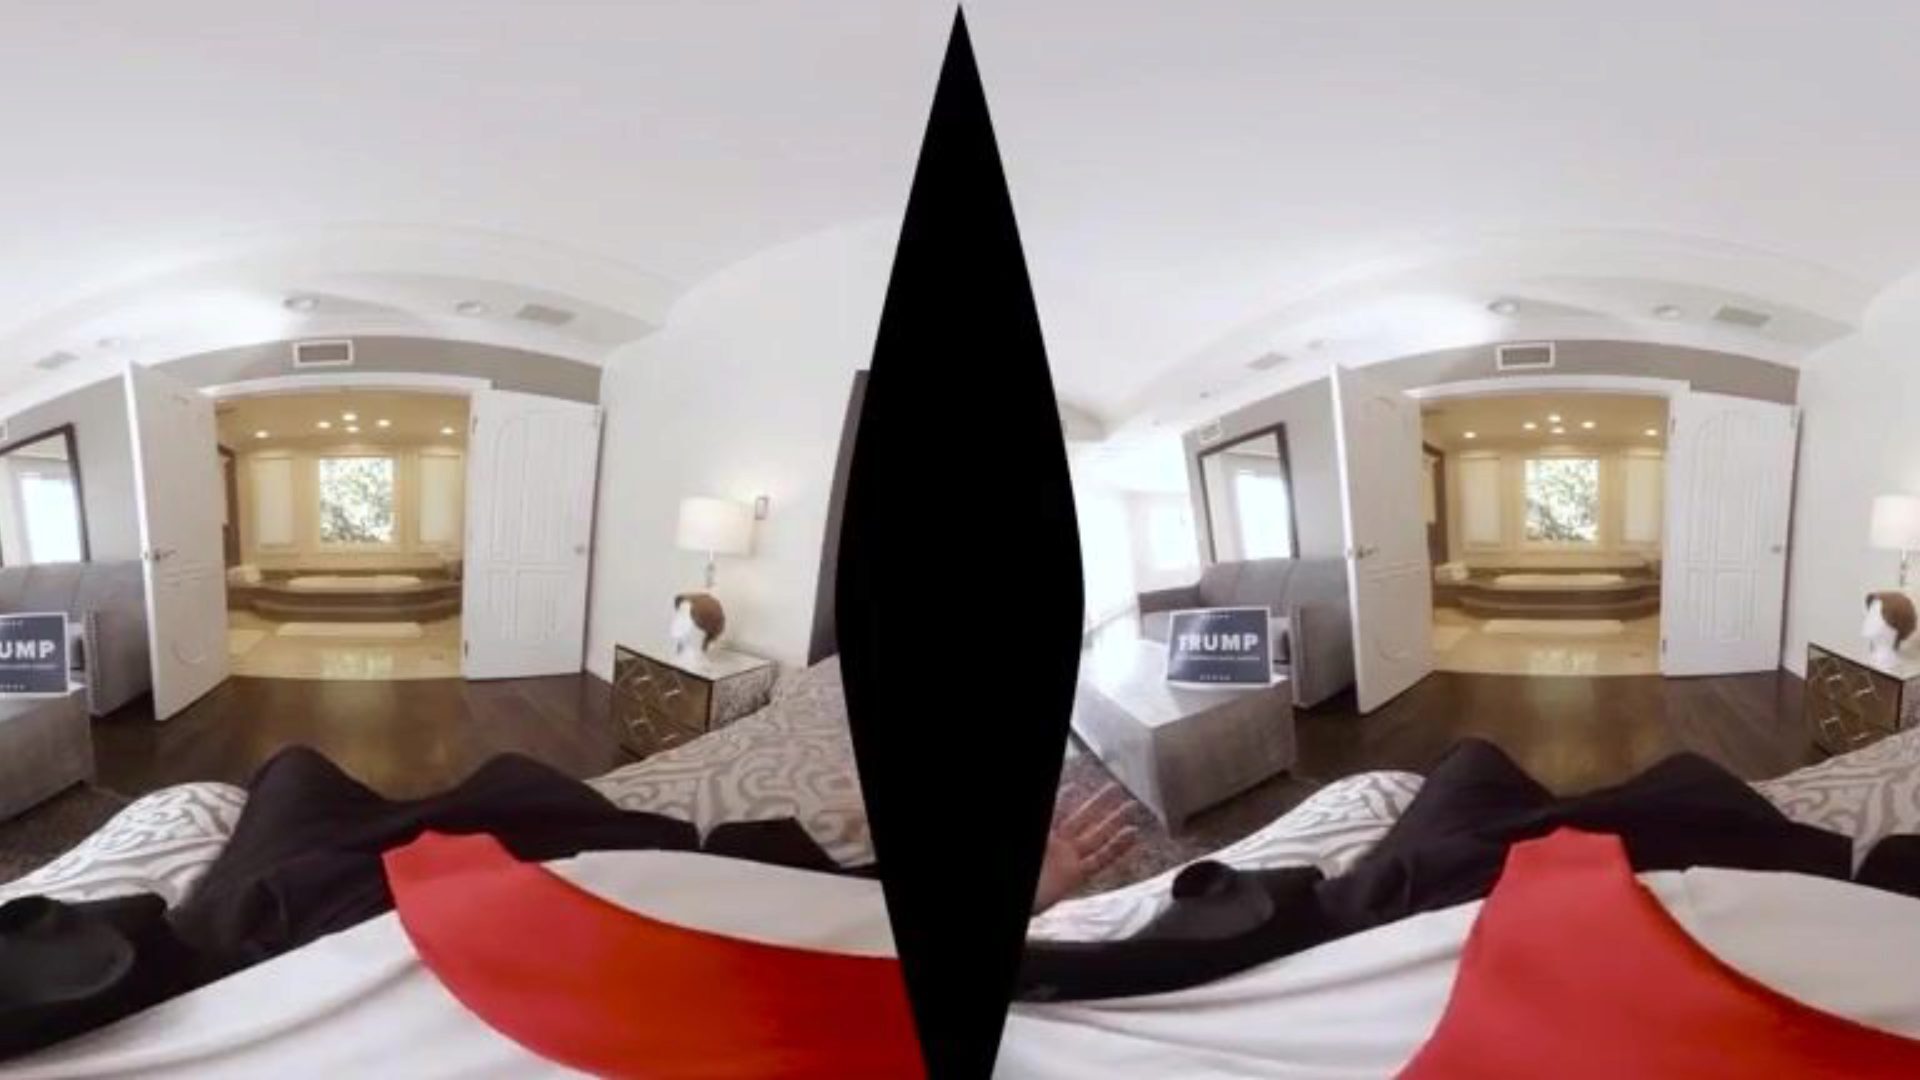 The Donald Trump Sex Tape – A XXX VR Parody - VR Porn Movie Scene - VRPorn.com Can u imagine shooting your own fuckfest tape in virtual reality? When u're Donald Trump, that's exactly what u do. Here at BaDoink we've managed to acquire our arms into that oozed VR gauze and